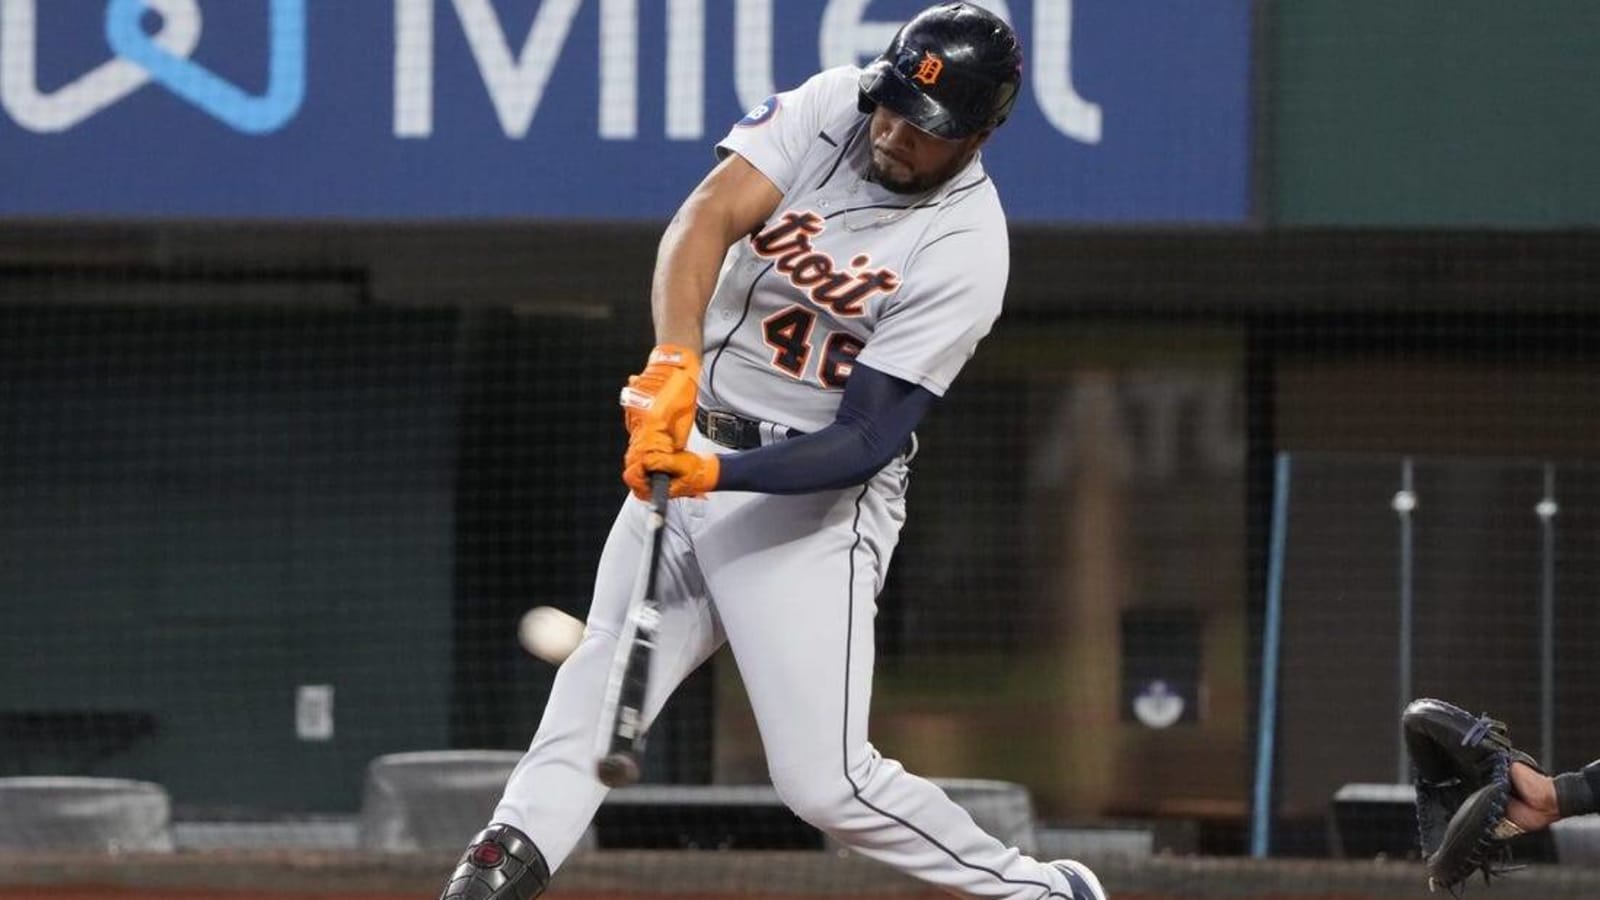 Harold Castro records five RBIs as Tigers hold off Rangers